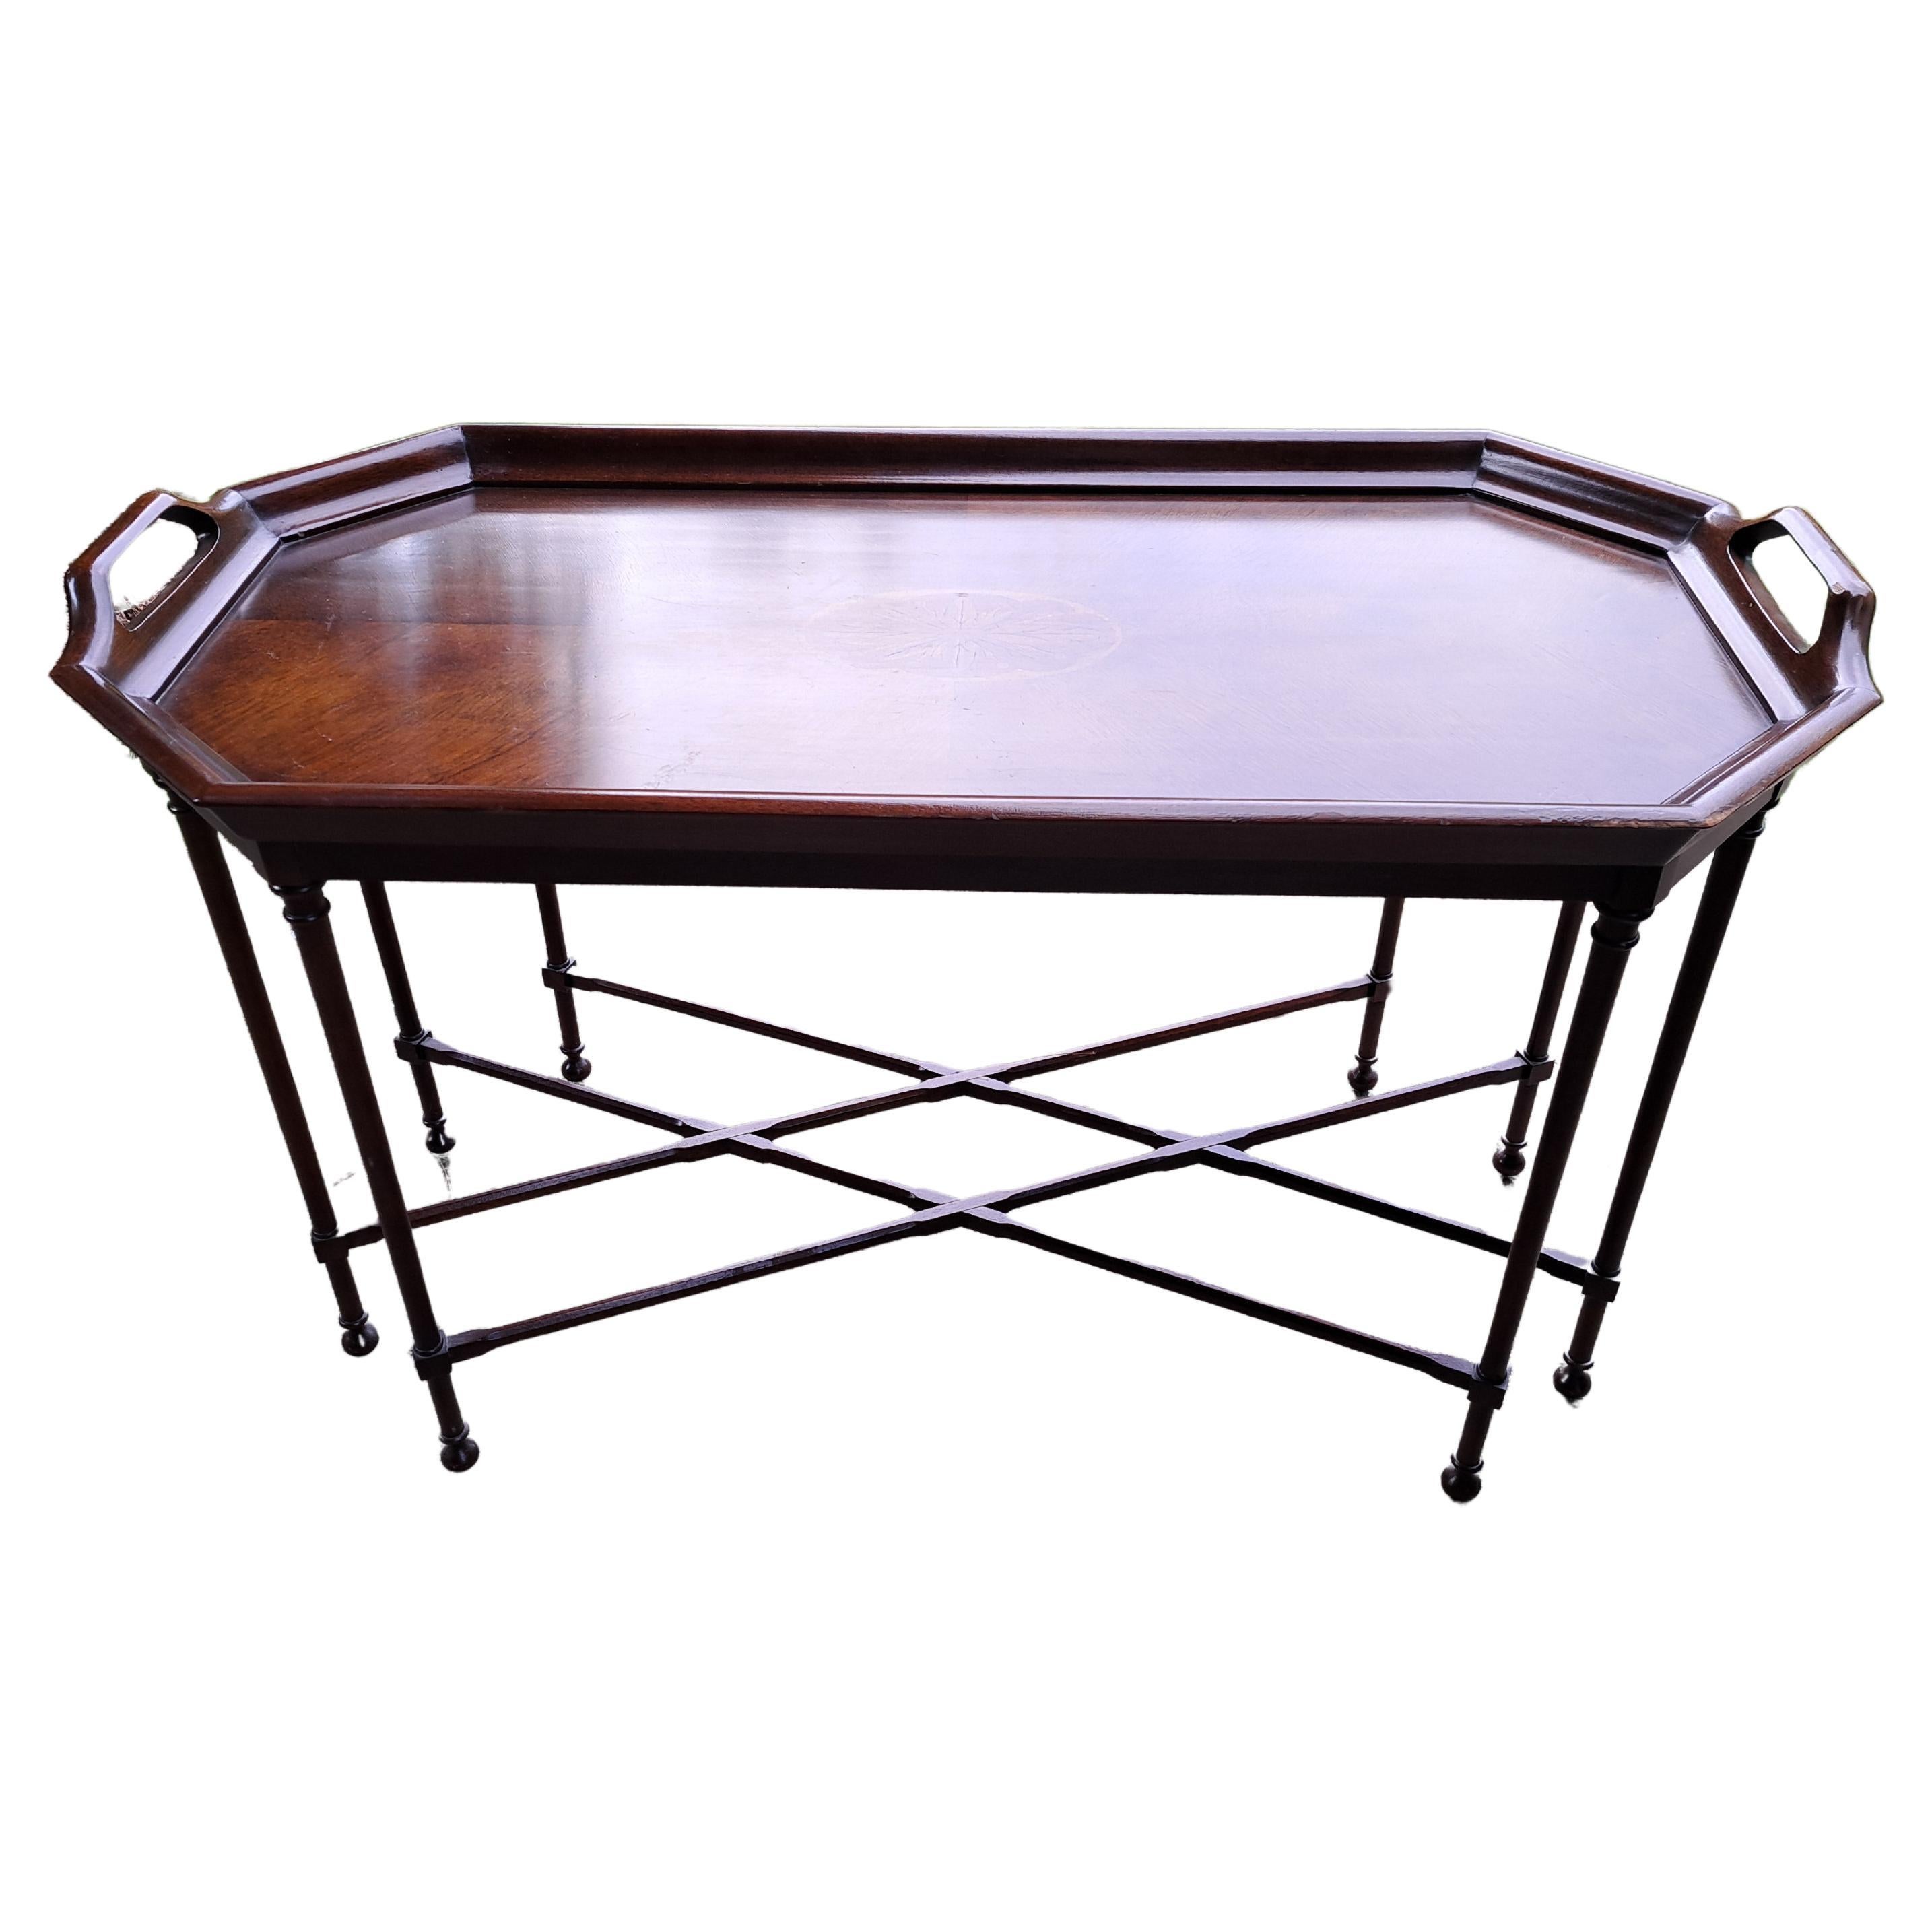 Mahogany Thin Legged Coffee Table By Councill Craftsmen